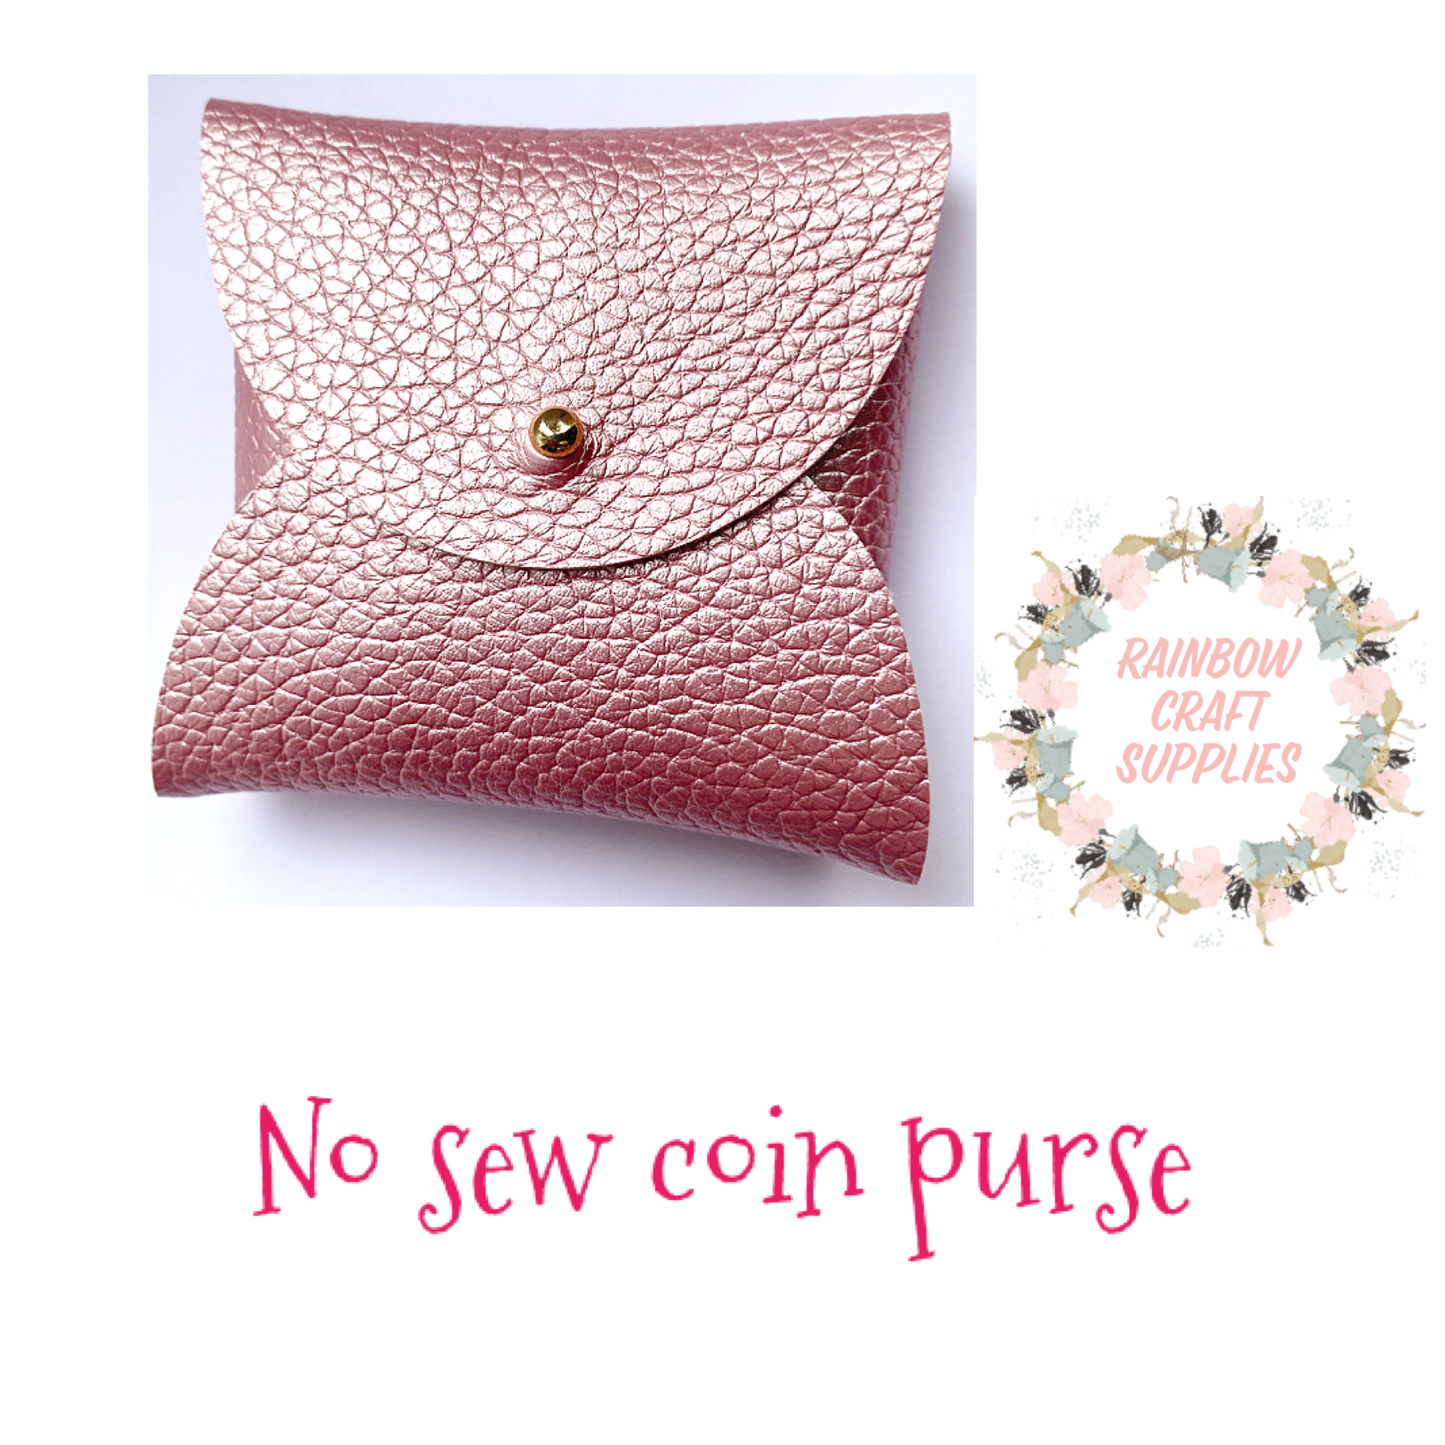 No sew coin purse digital download (no bow included)